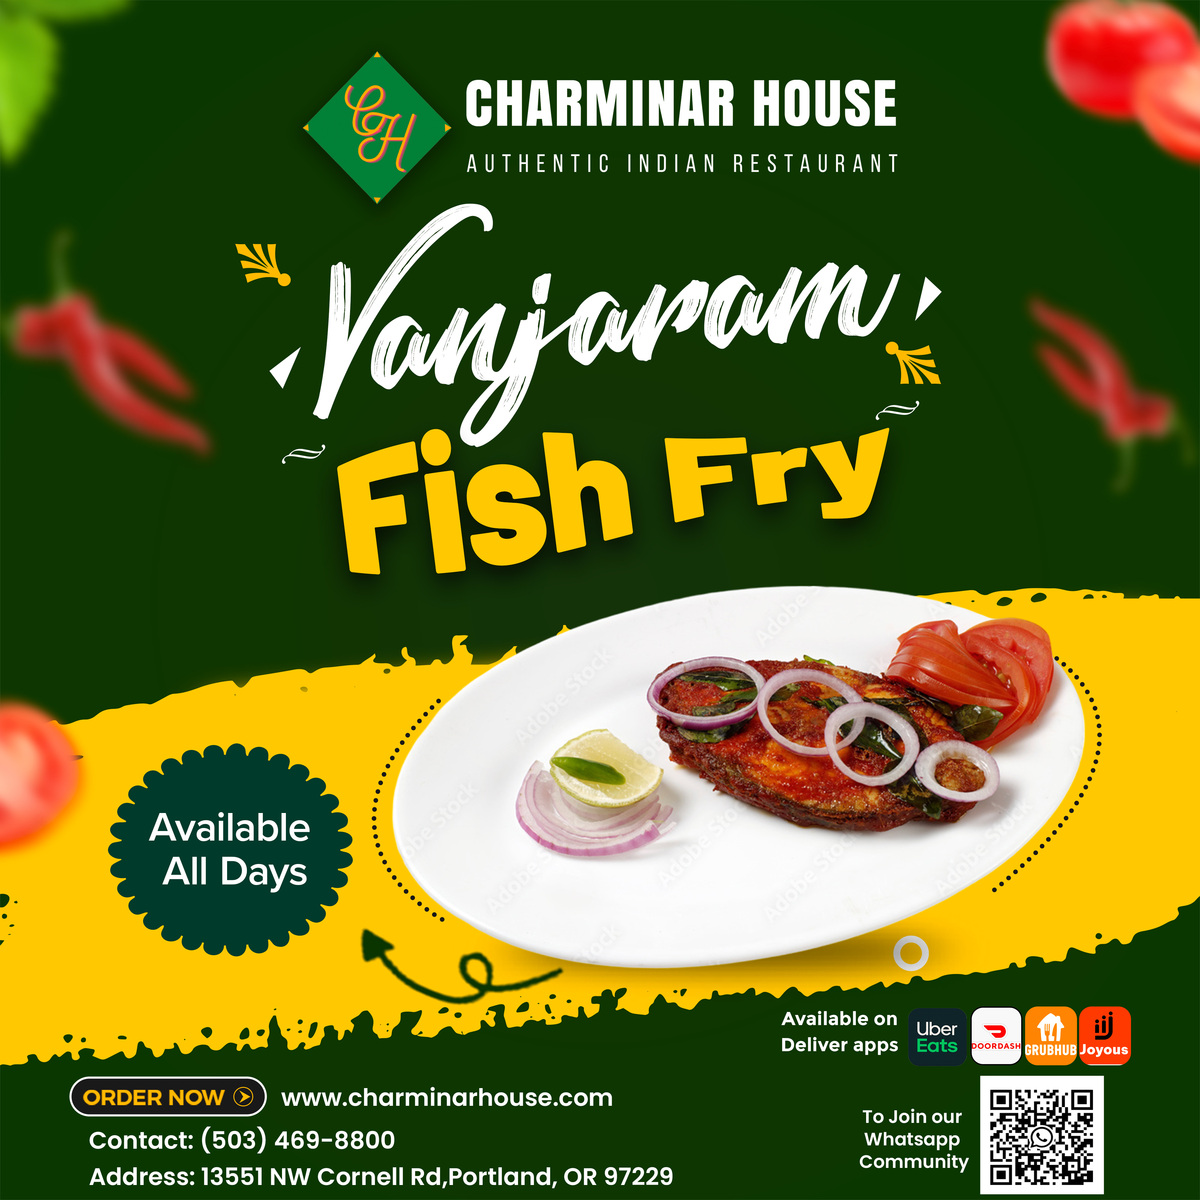 🐟🔥 Indulge in our delicious Vanjaram Fish Fry

Available every day at Charminar House! Satisfy your seafood cravings with our mouthwatering dish! 🐟🔥

#VanjaramFishFry #SeafoodDelight #CharminarHouse #PortlandEats #PortlandFoodie